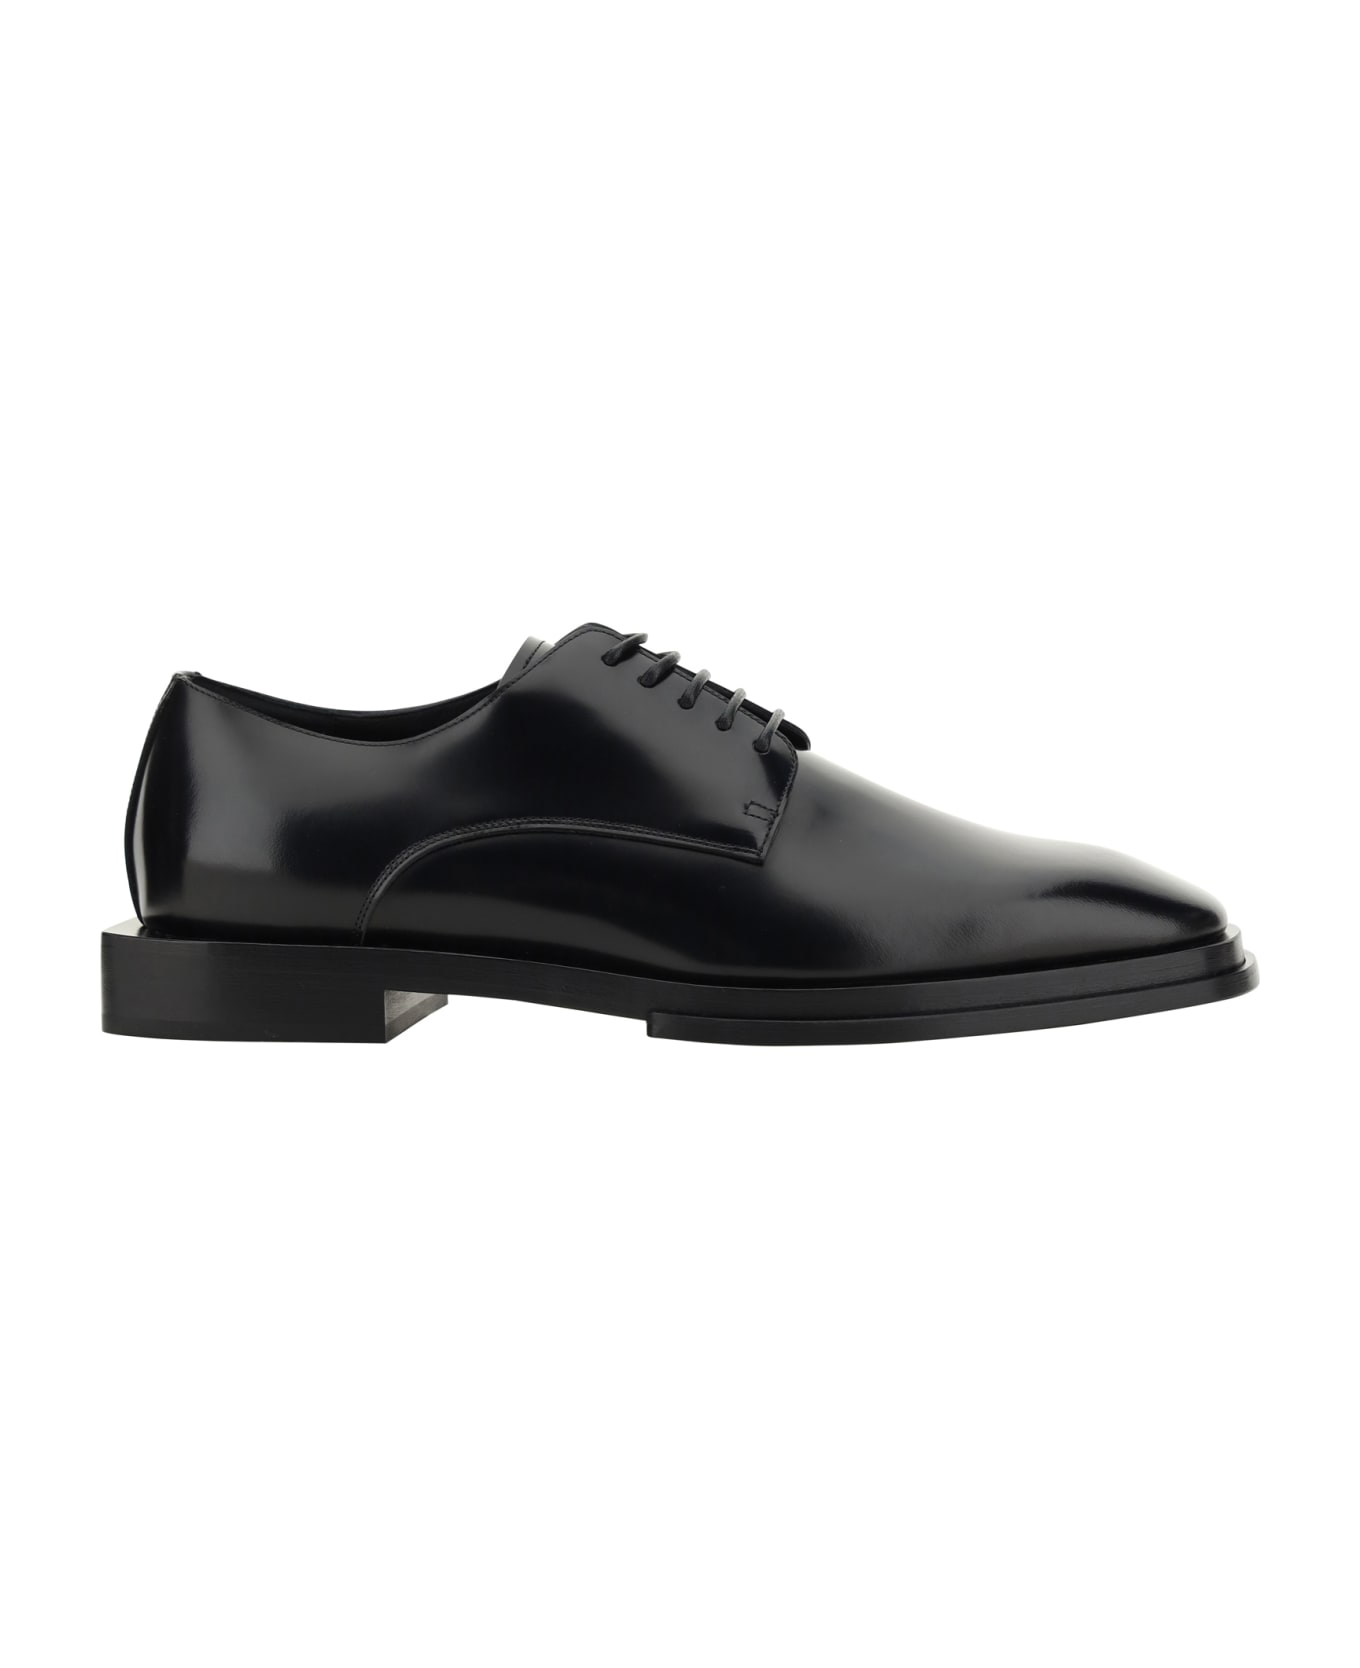 Alexander McQueen Lace Up Shoes - Black/silver ローファー＆デッキシューズ